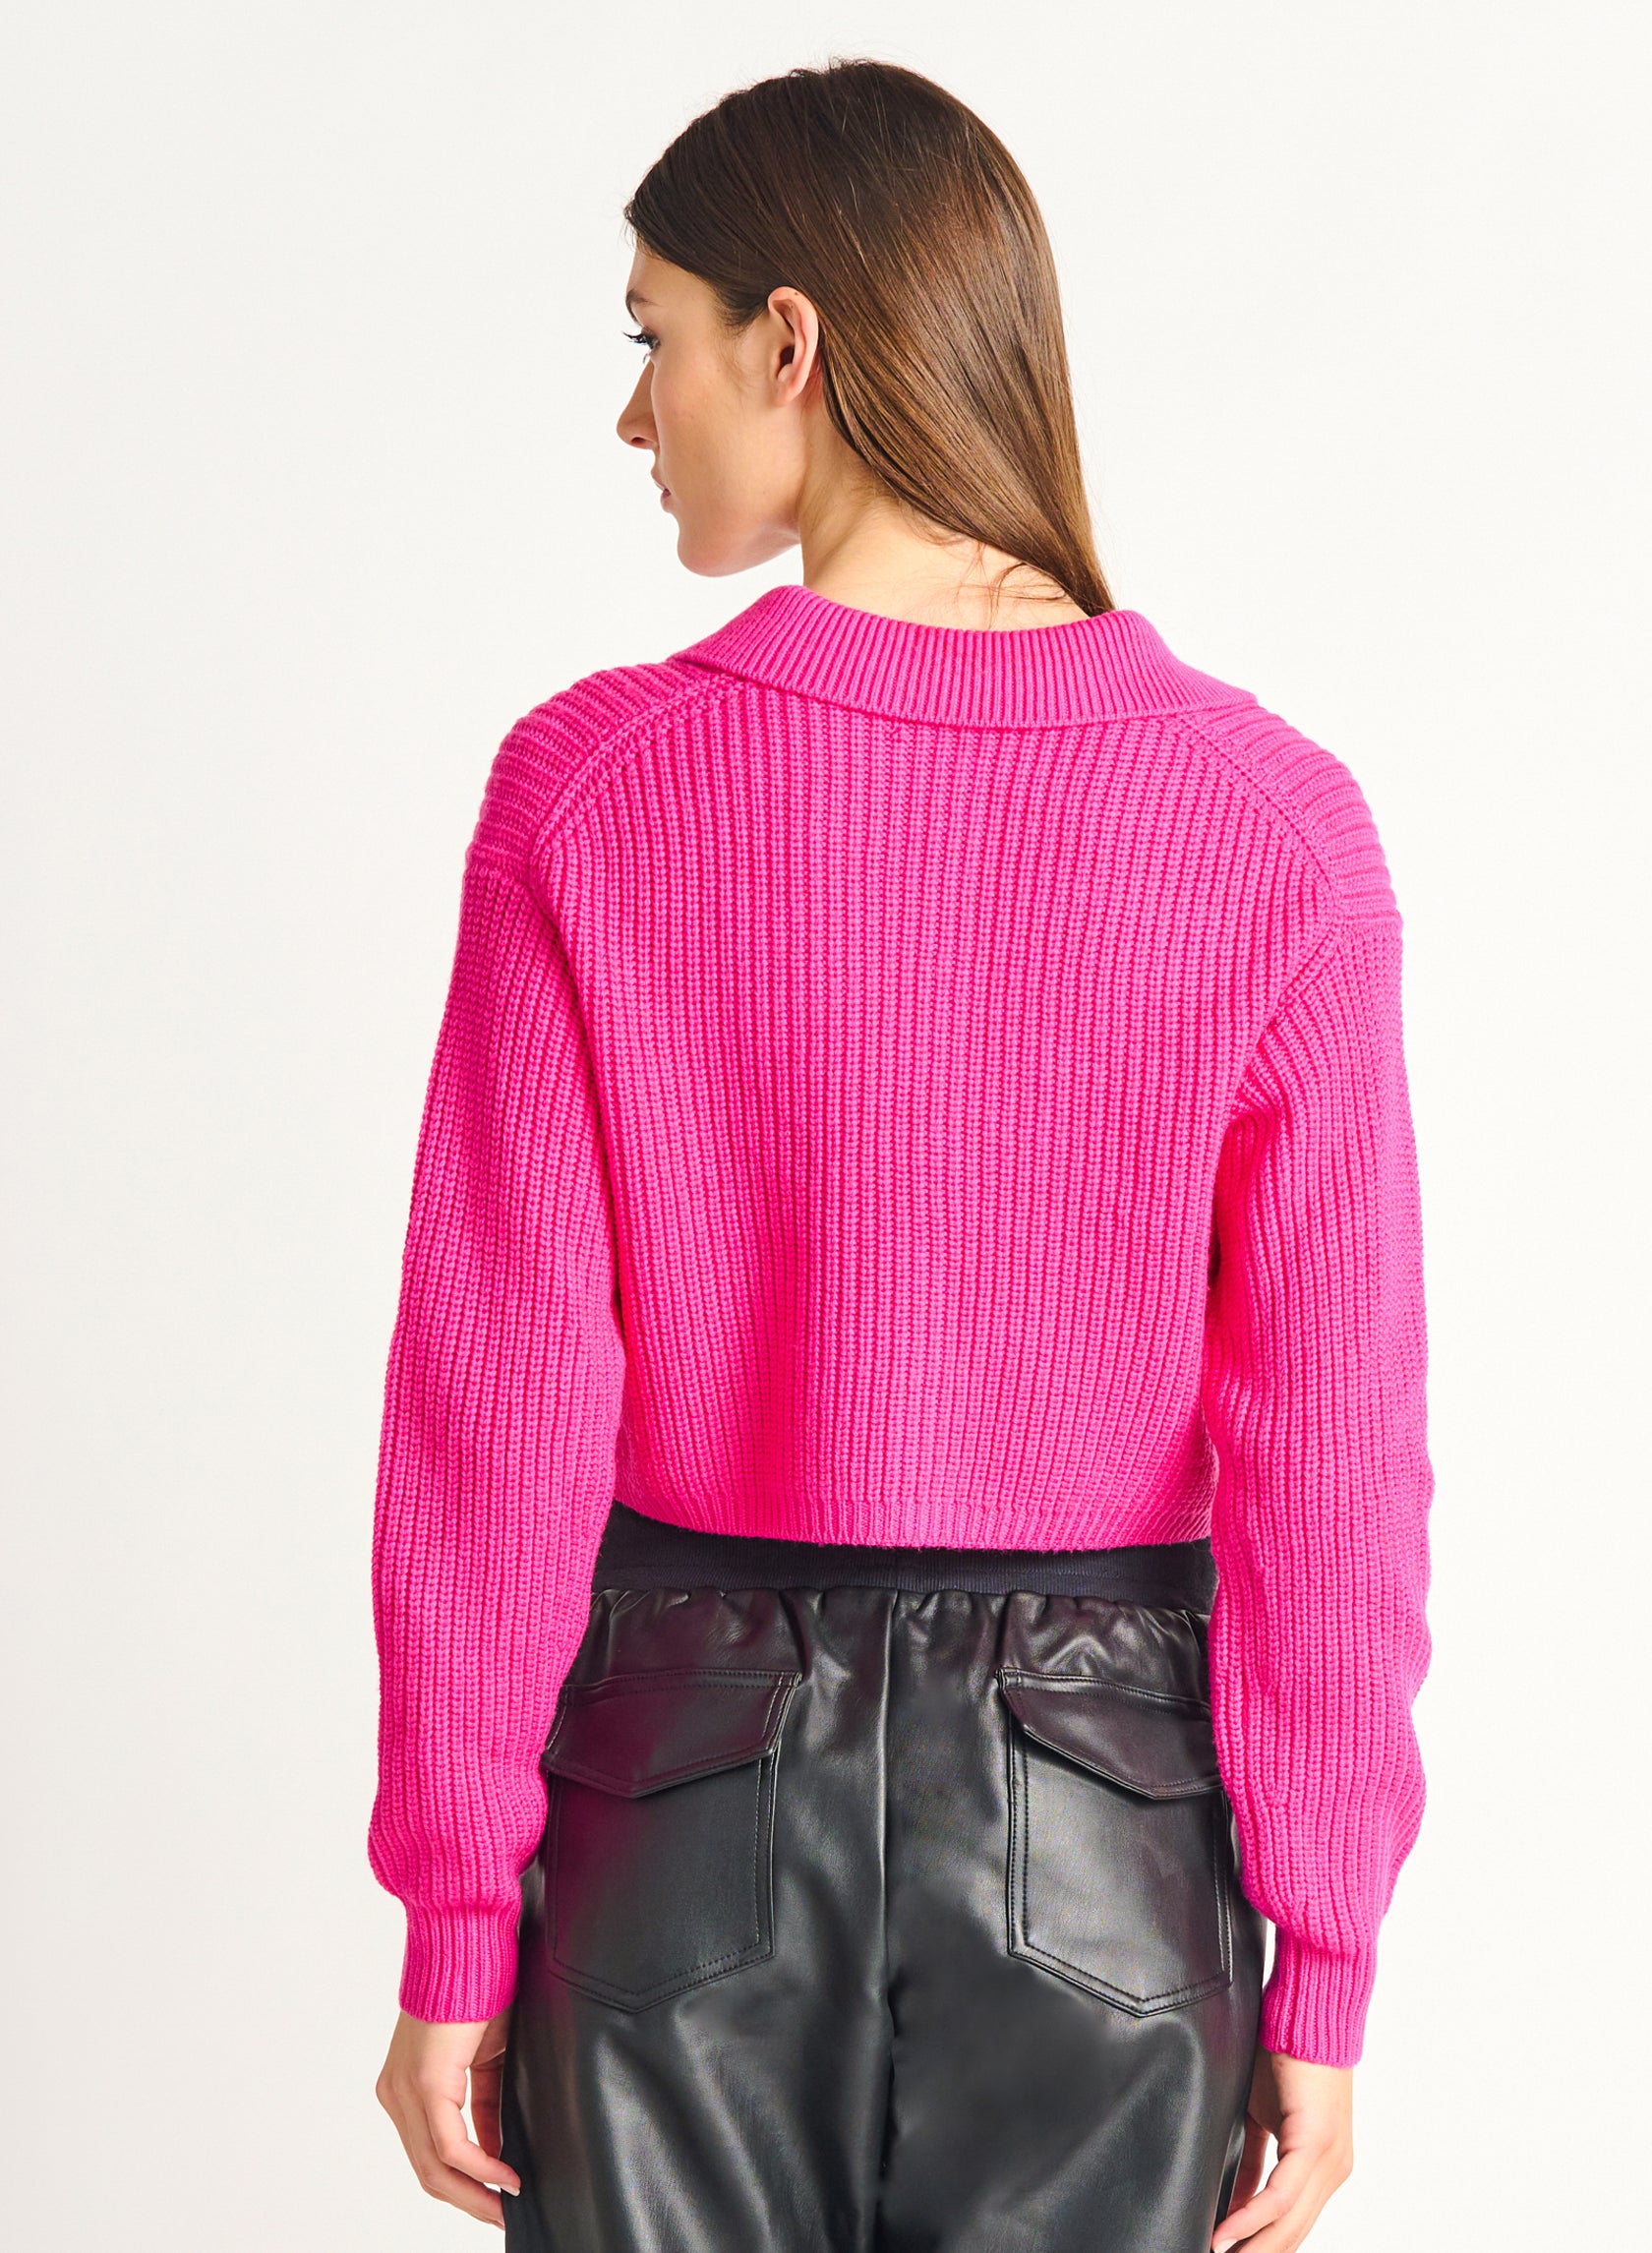 Hot Pink Button Front Cardigan with Pleather joggers - dex - Alberta Boutique-